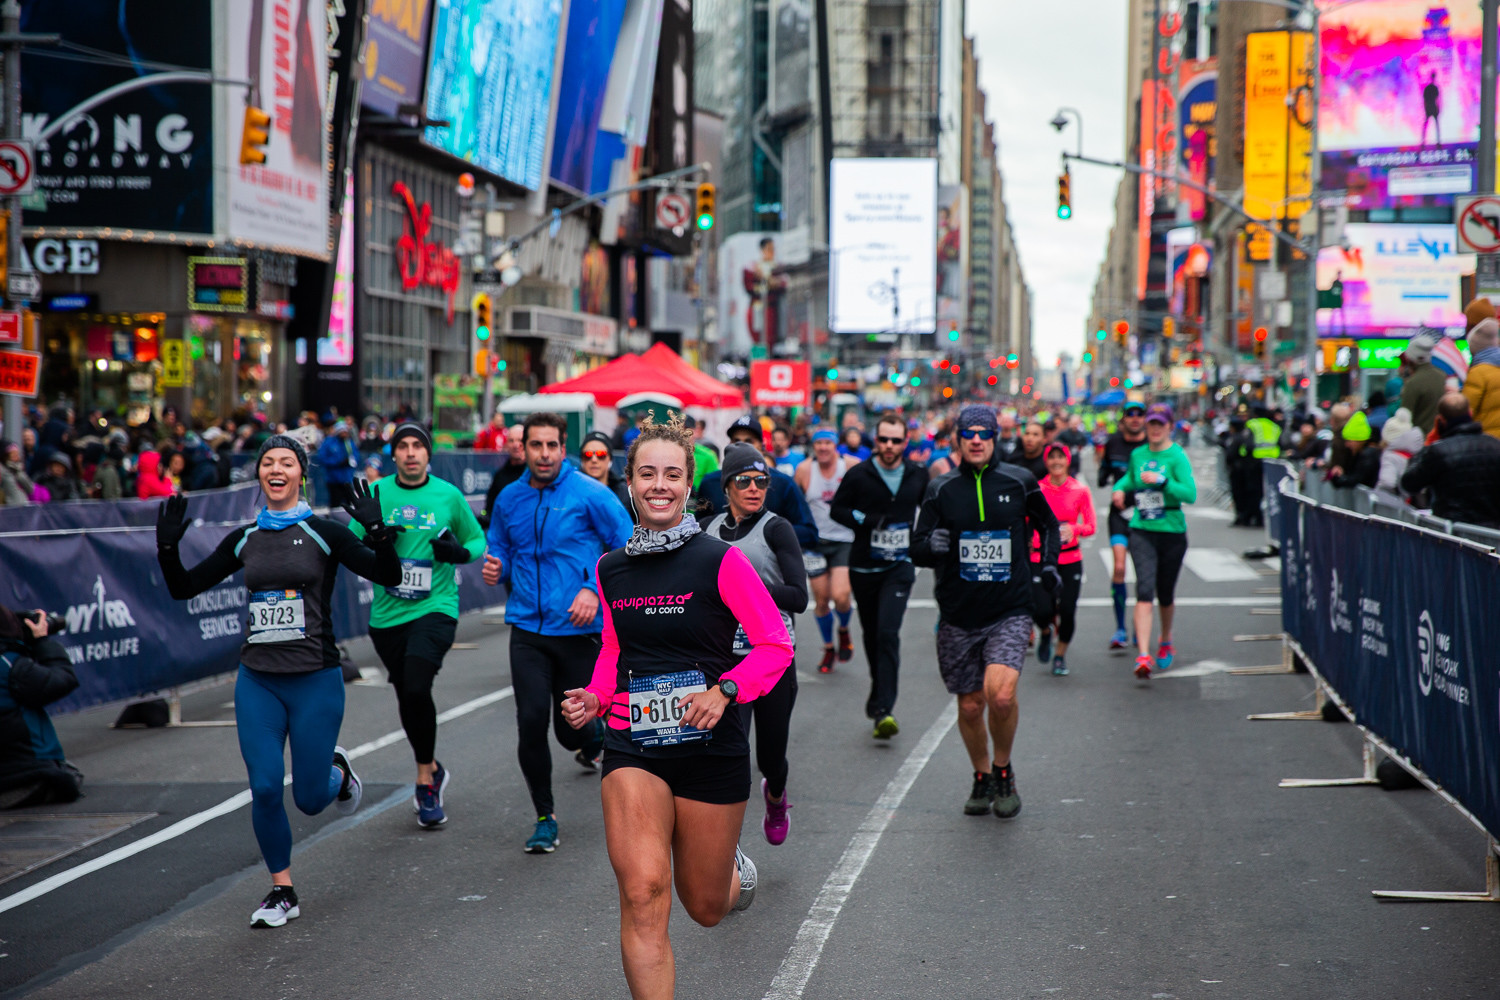 United Airlines New York City Half-Marathon has been cancelled due to the Coronavirus